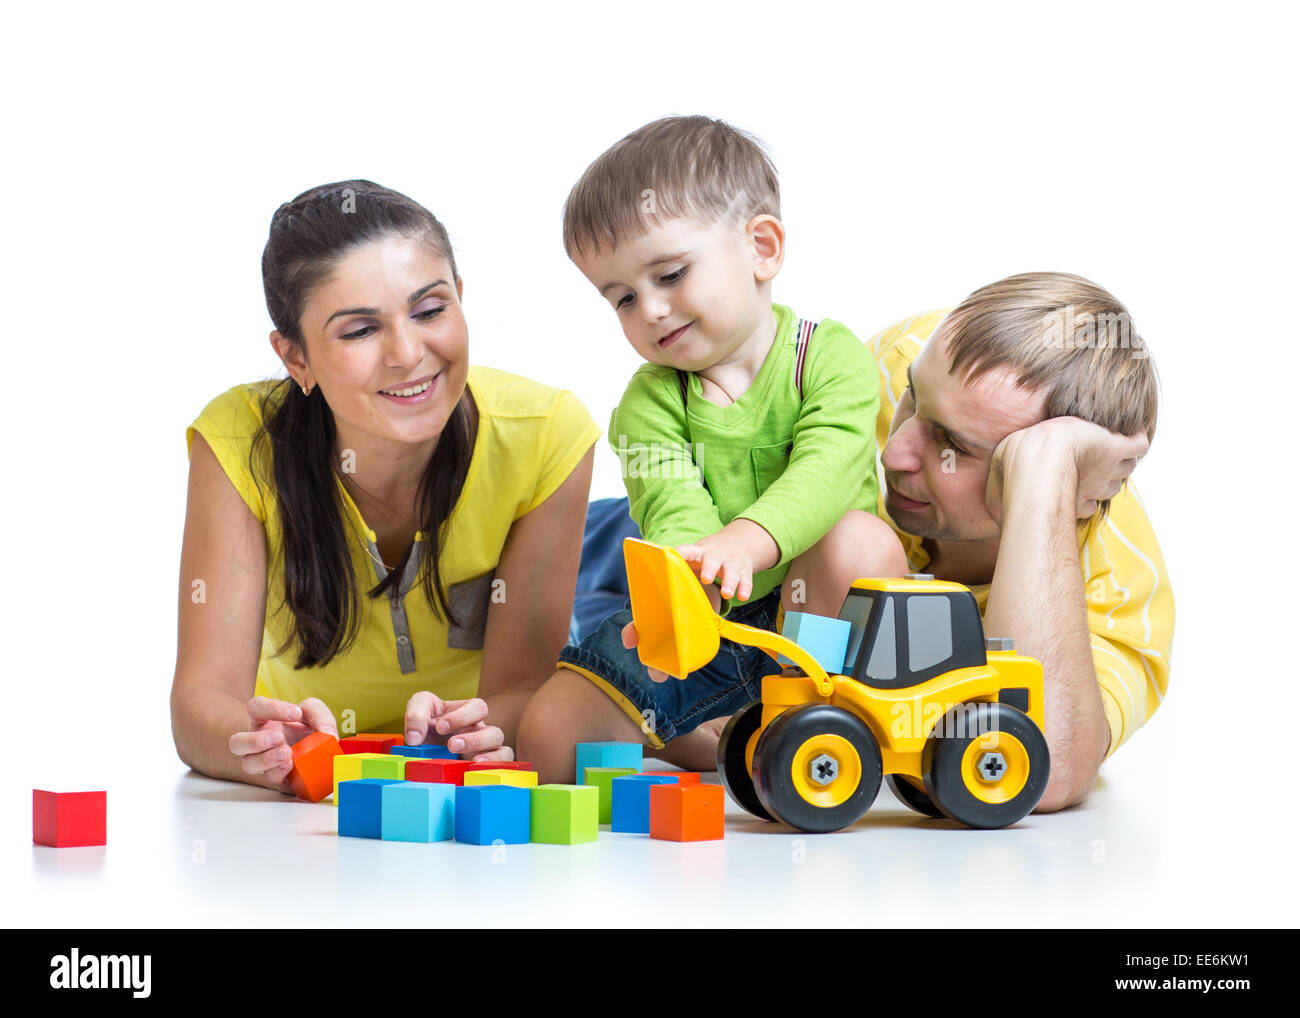 child boy with parents play building blocks Stock Photo